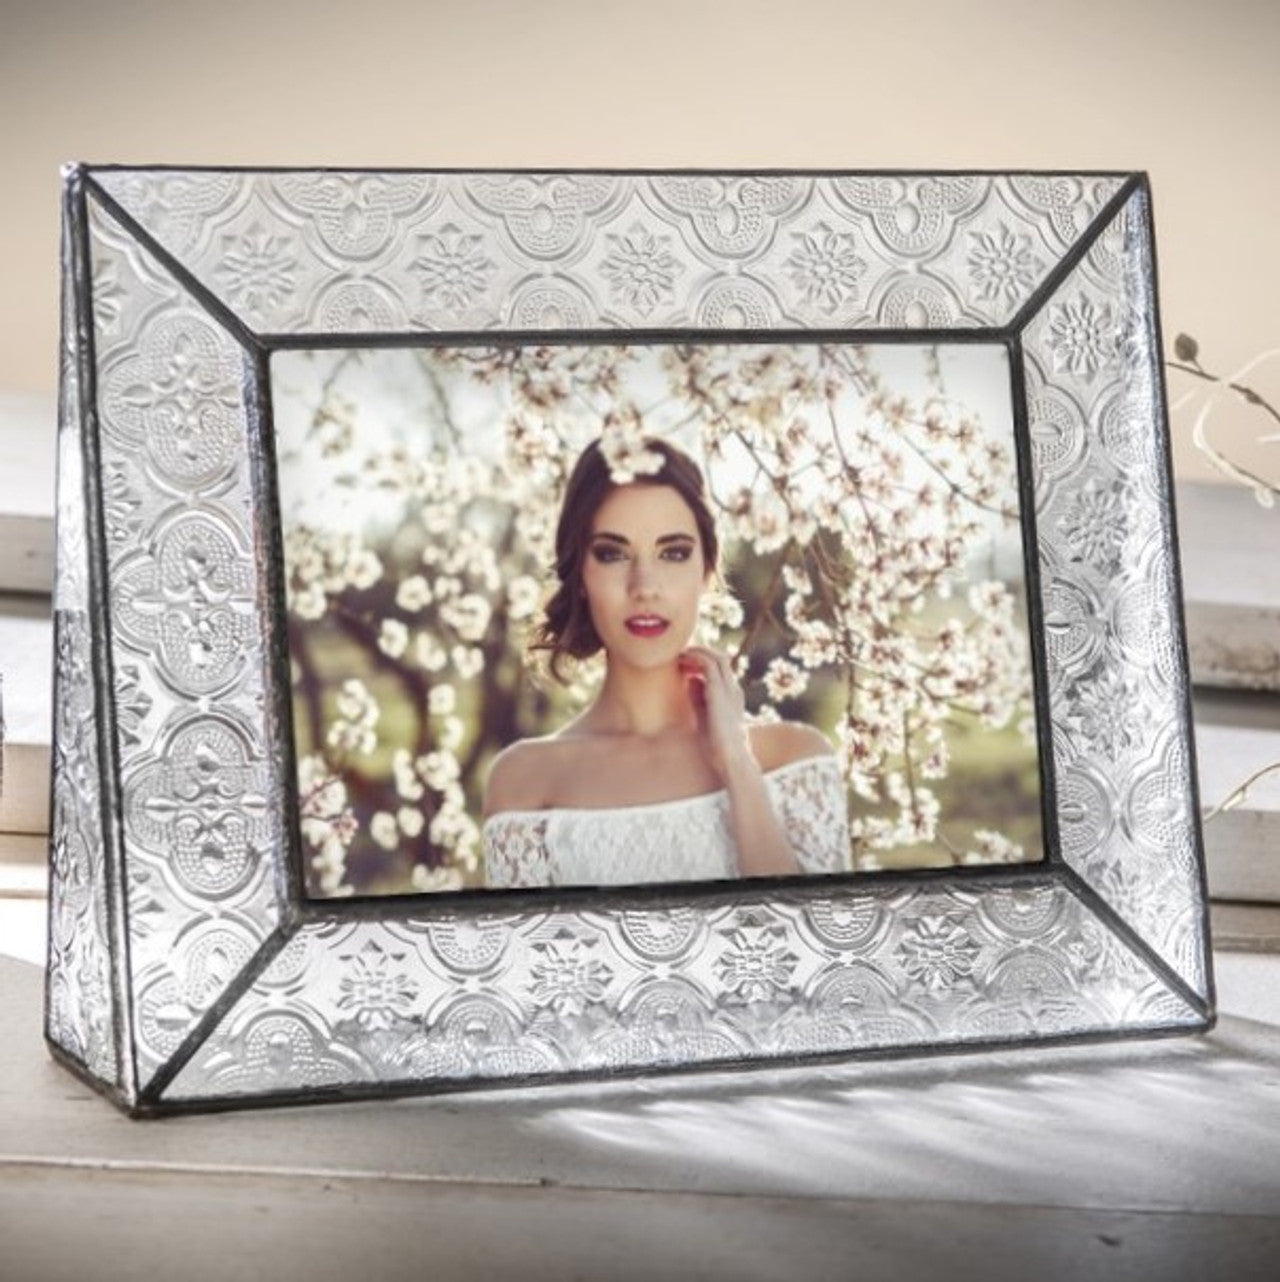 Leaded Glass Picture Frame (Vintage, 4 × 6 Horizontal)